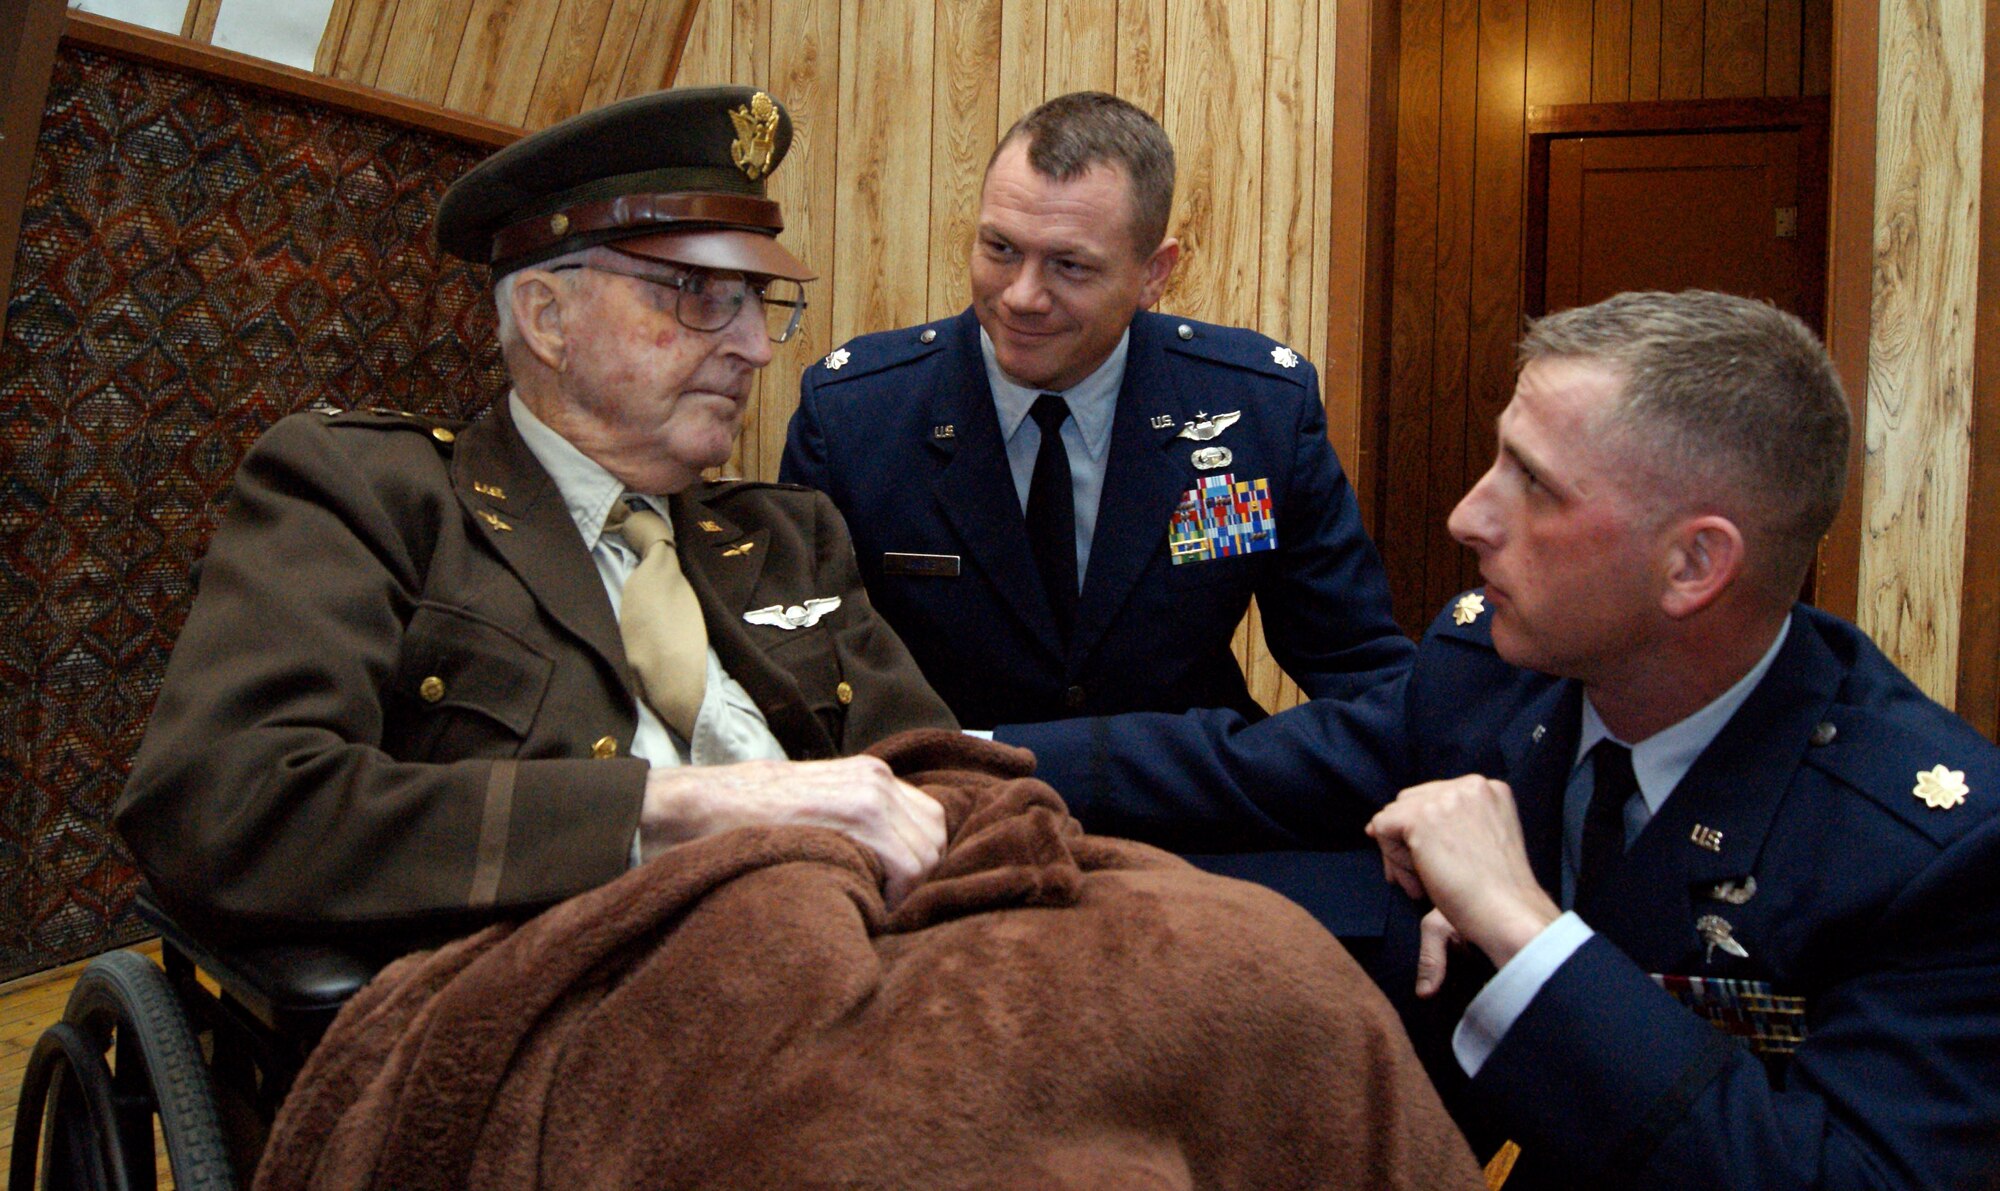 (Left to right) Mr. Gordon Ballagh, World War II veteran, Lt. Col. Stan Lawrie, 22nd Air Refueling Wing Safety chief and Maj. Darrin DeReus, 22nd Comptroller Squadron commander, pose for photograph just before a ceremony Feb. 9, 2011, Burwell, Neb.  The ceremony was in honor of Mr. Ballagh, who received a Prisoner of War Medal, the WWII Victory Medal, the American Campaign Medal and the Euro-African-Middle Eastern Medal, after more than 65 years. (Courtesy photo)